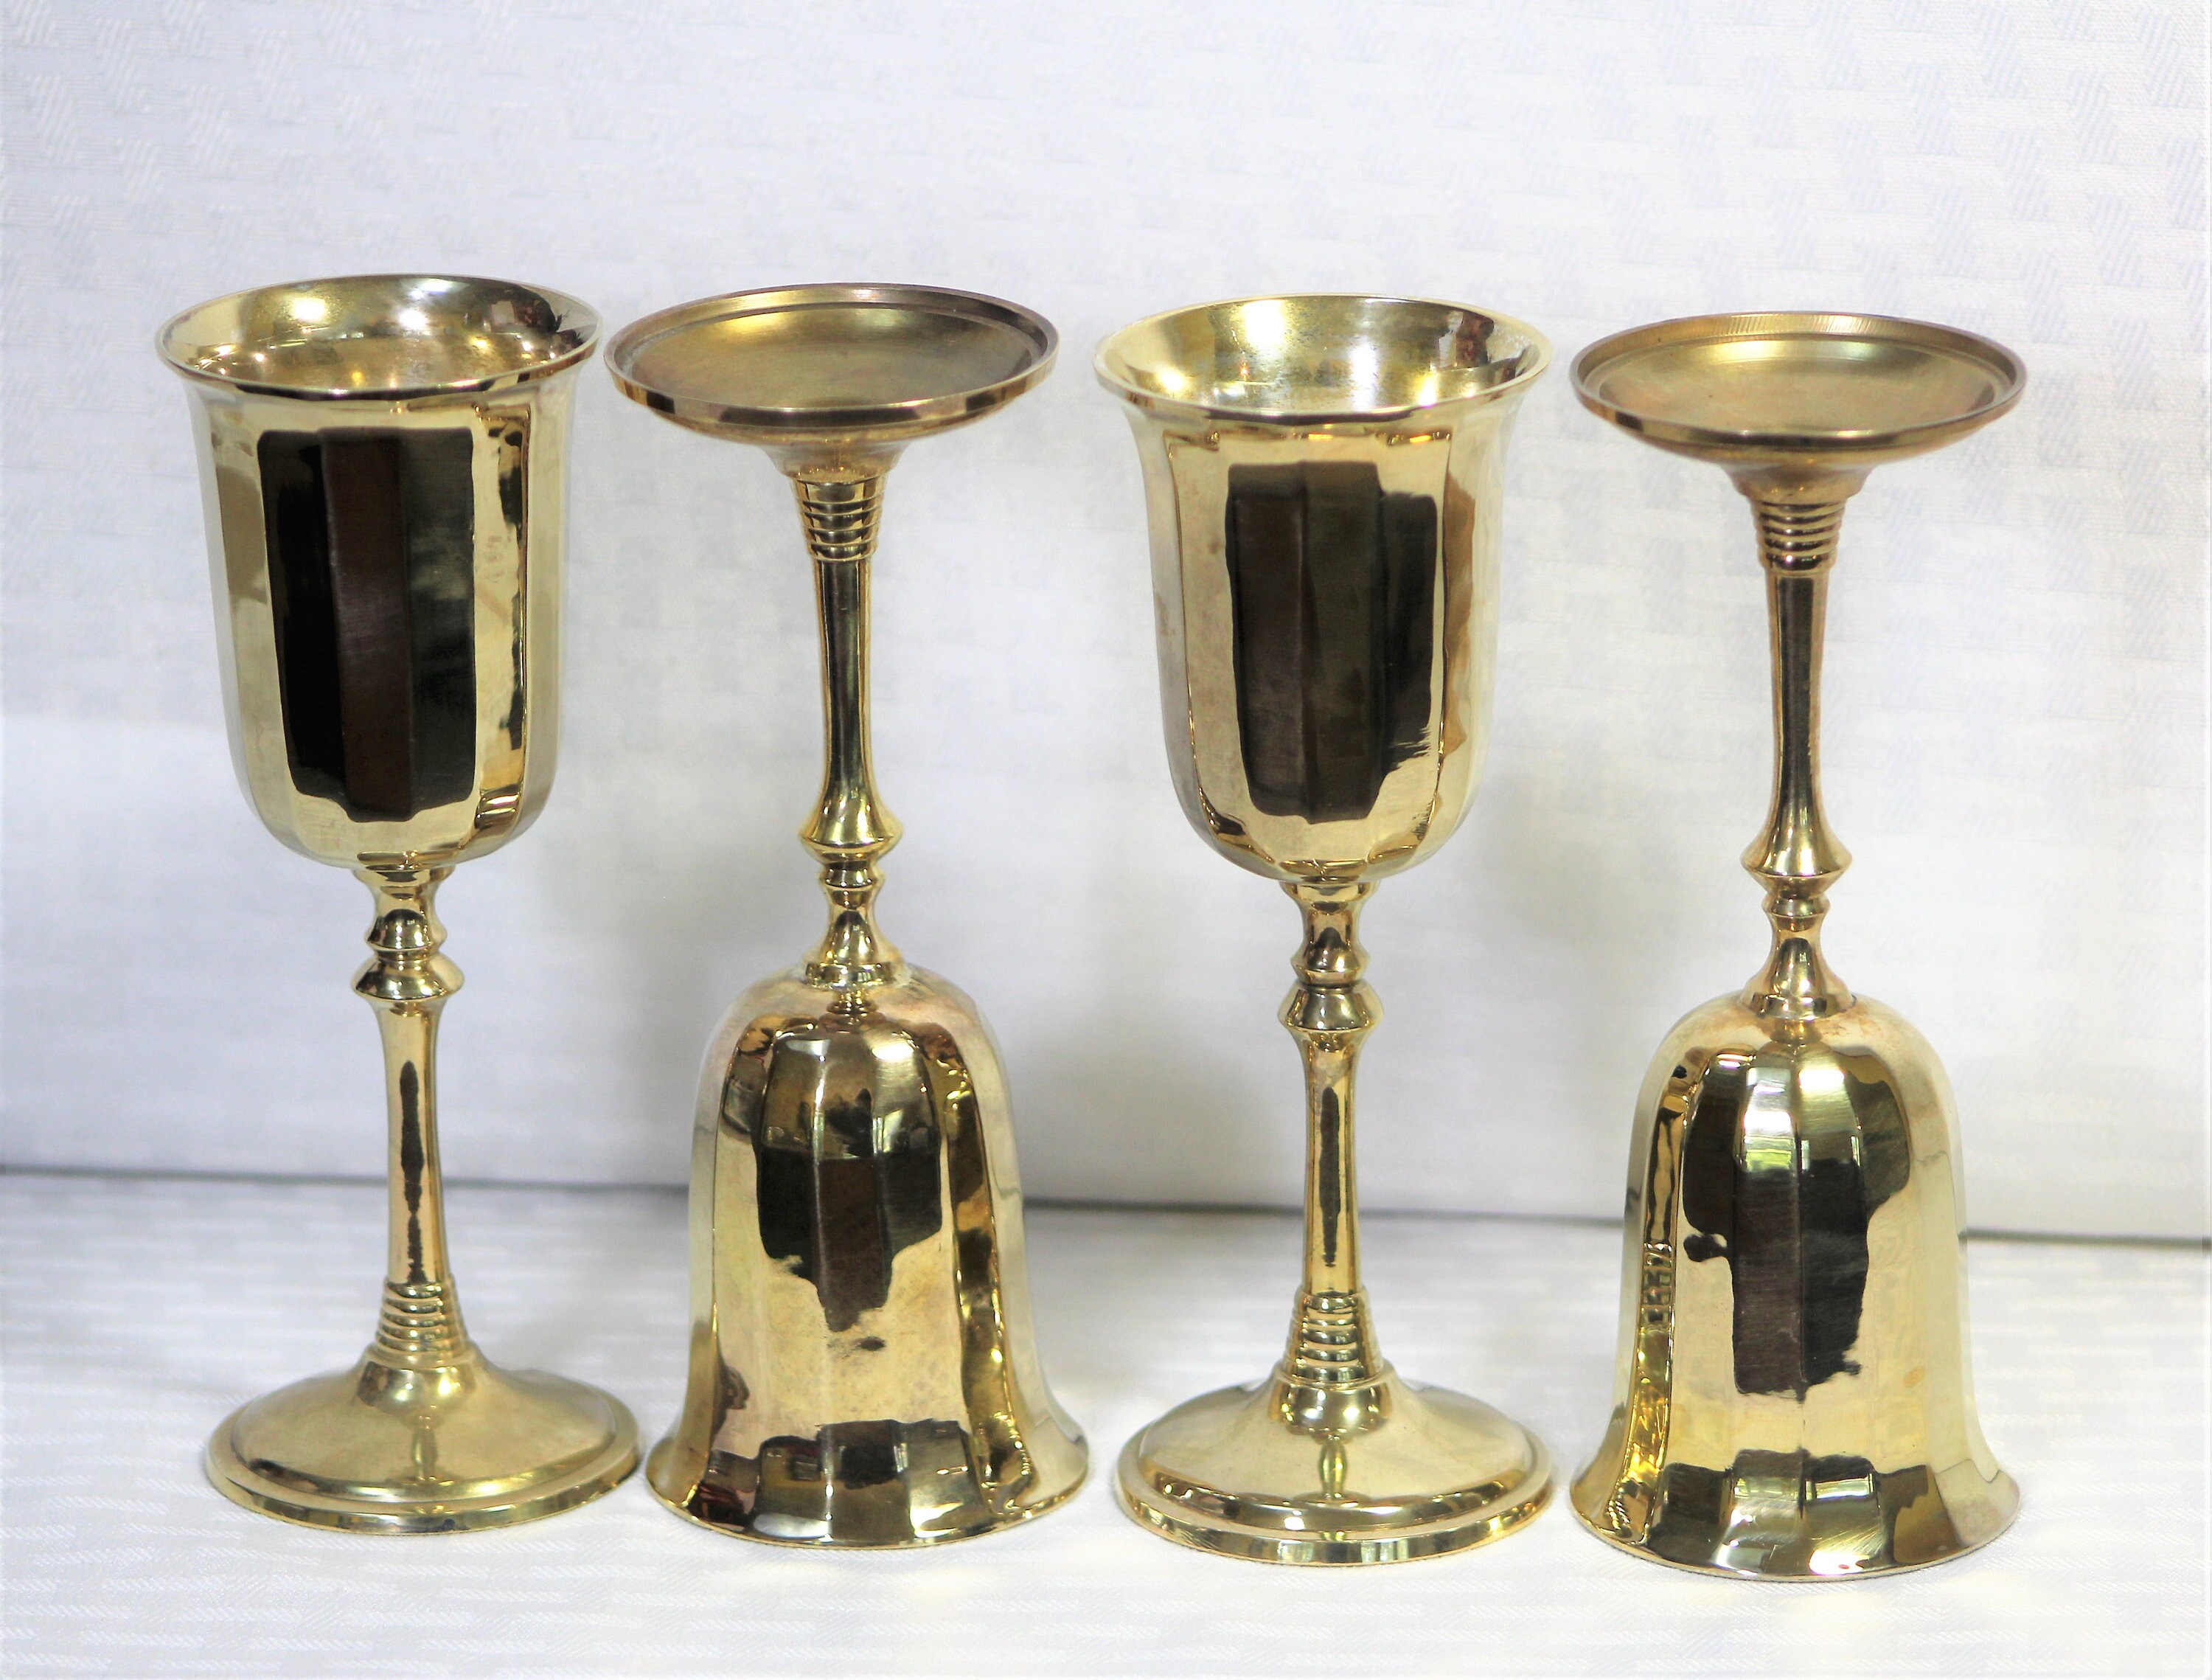 Solid Brass Wine Goblets With Silver Plate Interior and Paneled Sides, Made  by Gatco, Mid Century Barware, Set of 4 -  Israel